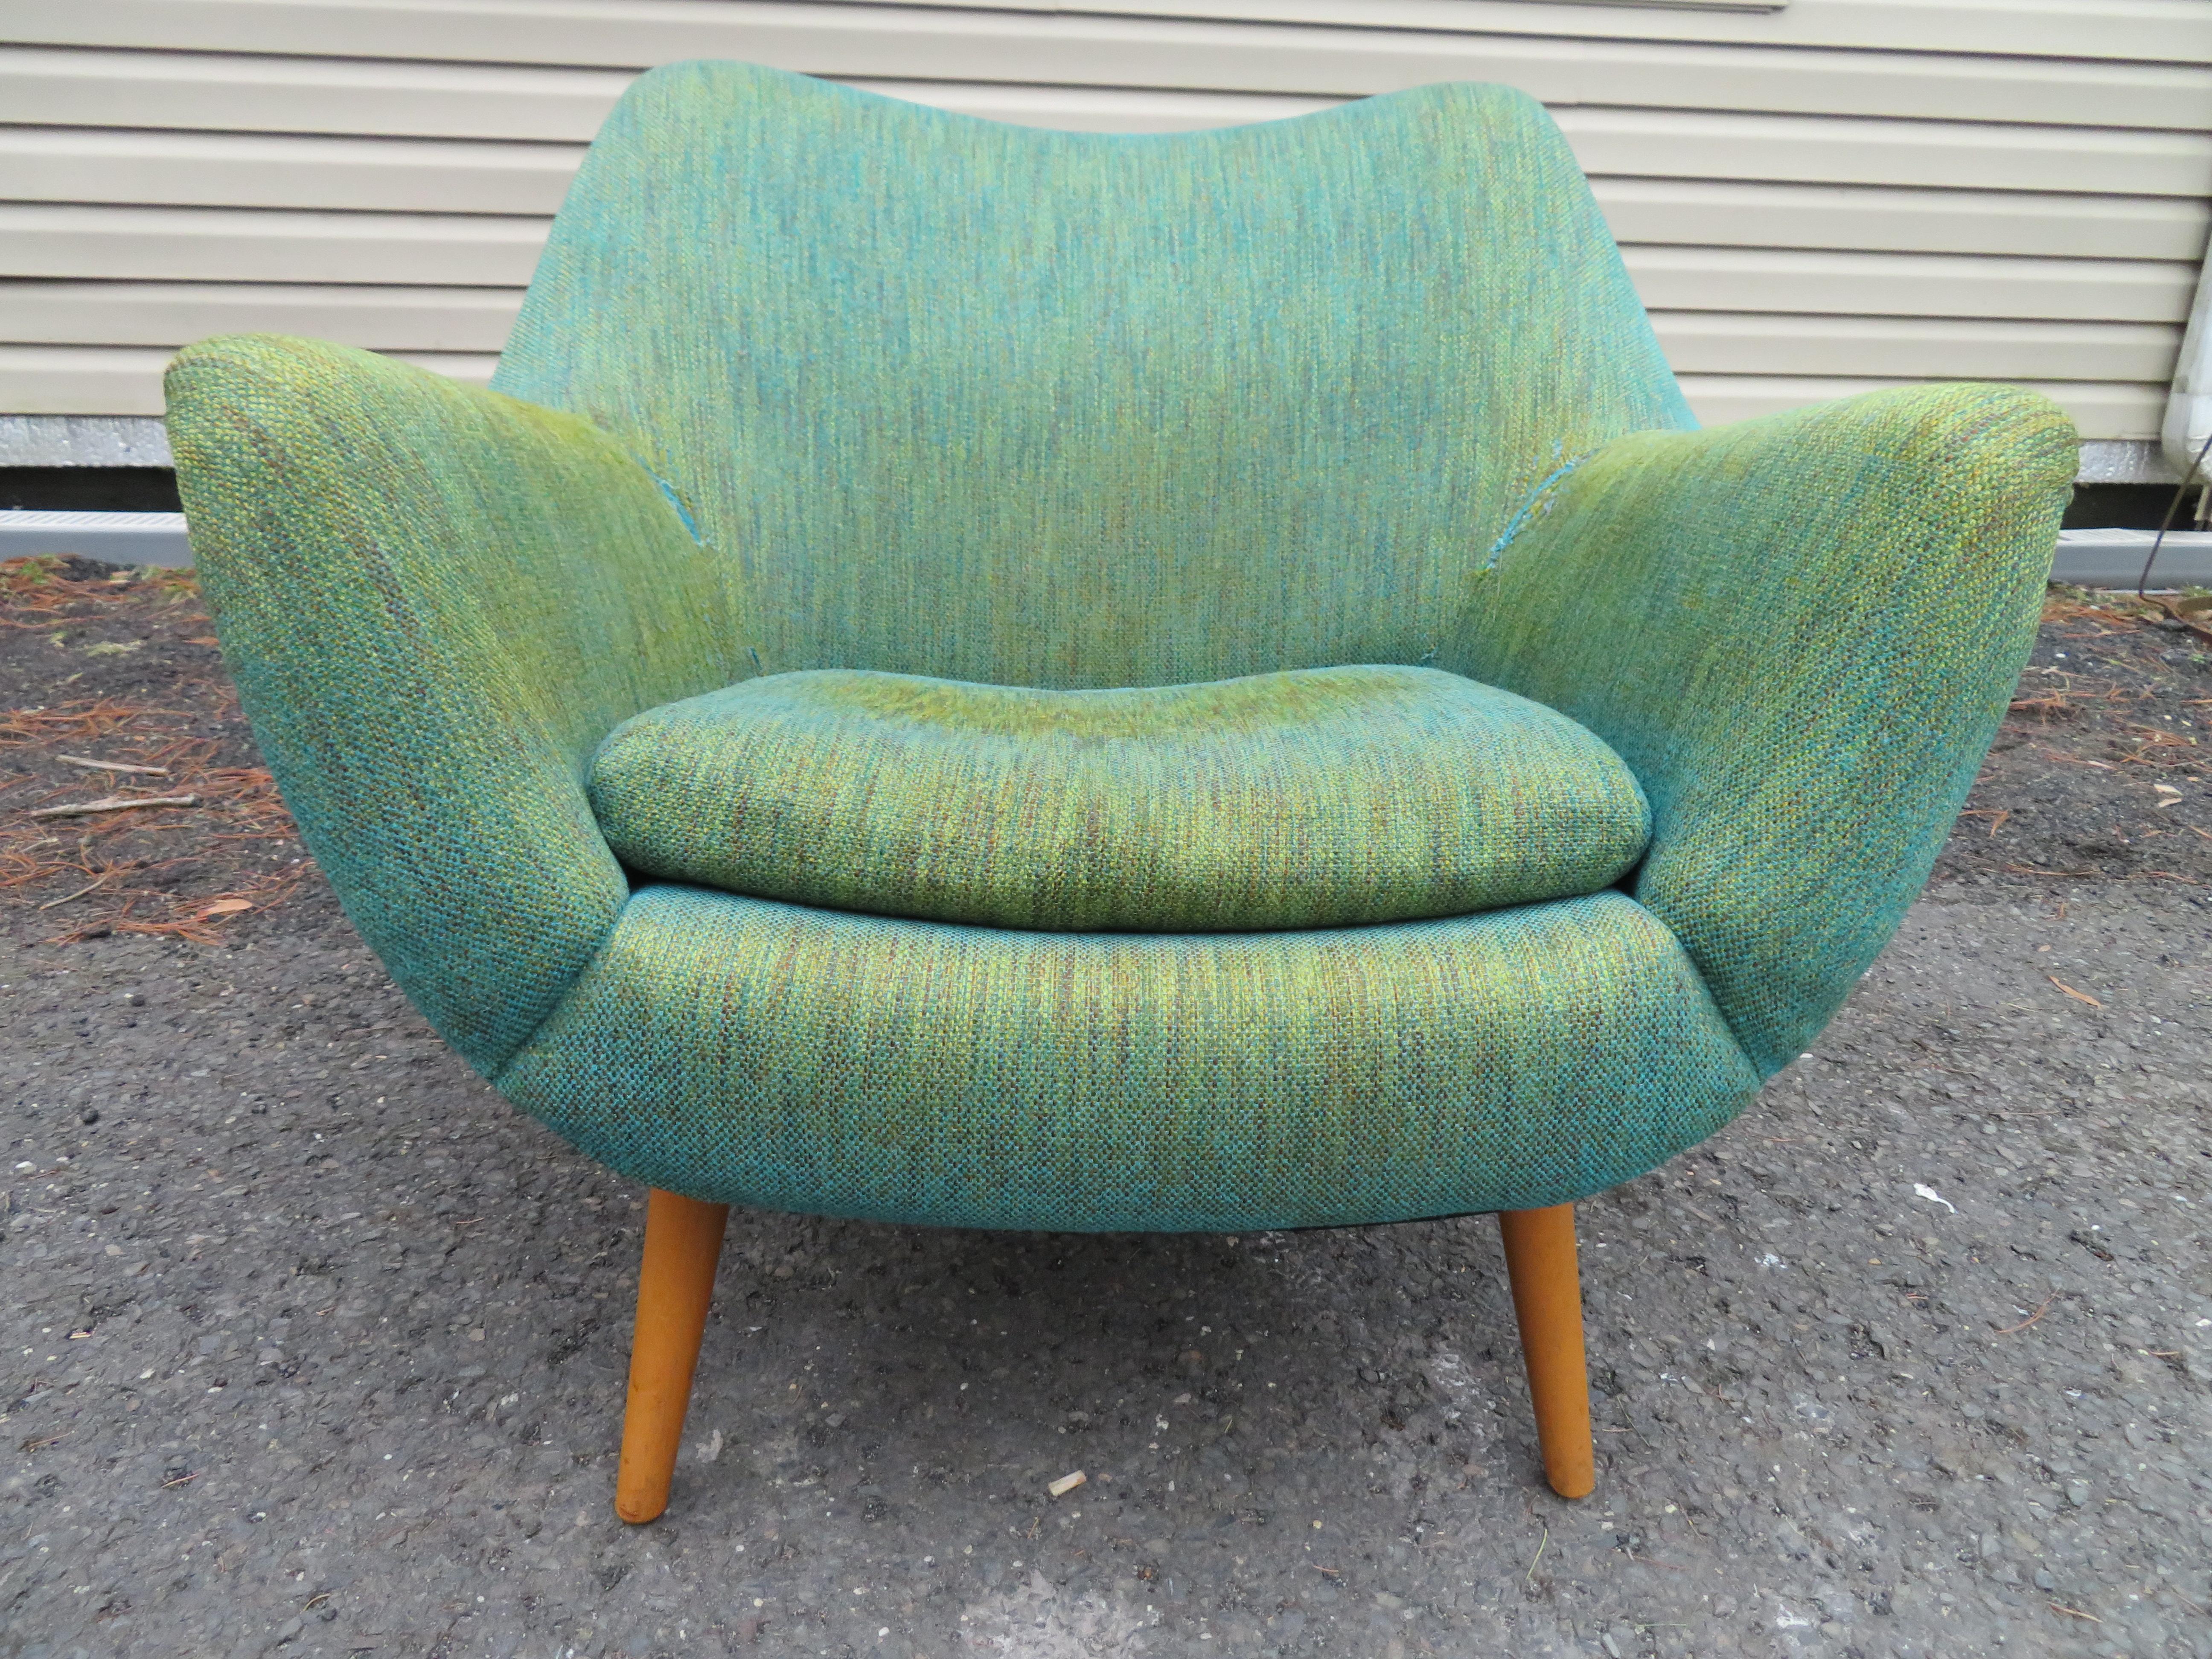 Stylish Pair Lawrence Peabody Barrel Back Tub Chair Selig, Mid-Century Modern In Good Condition For Sale In Pemberton, NJ